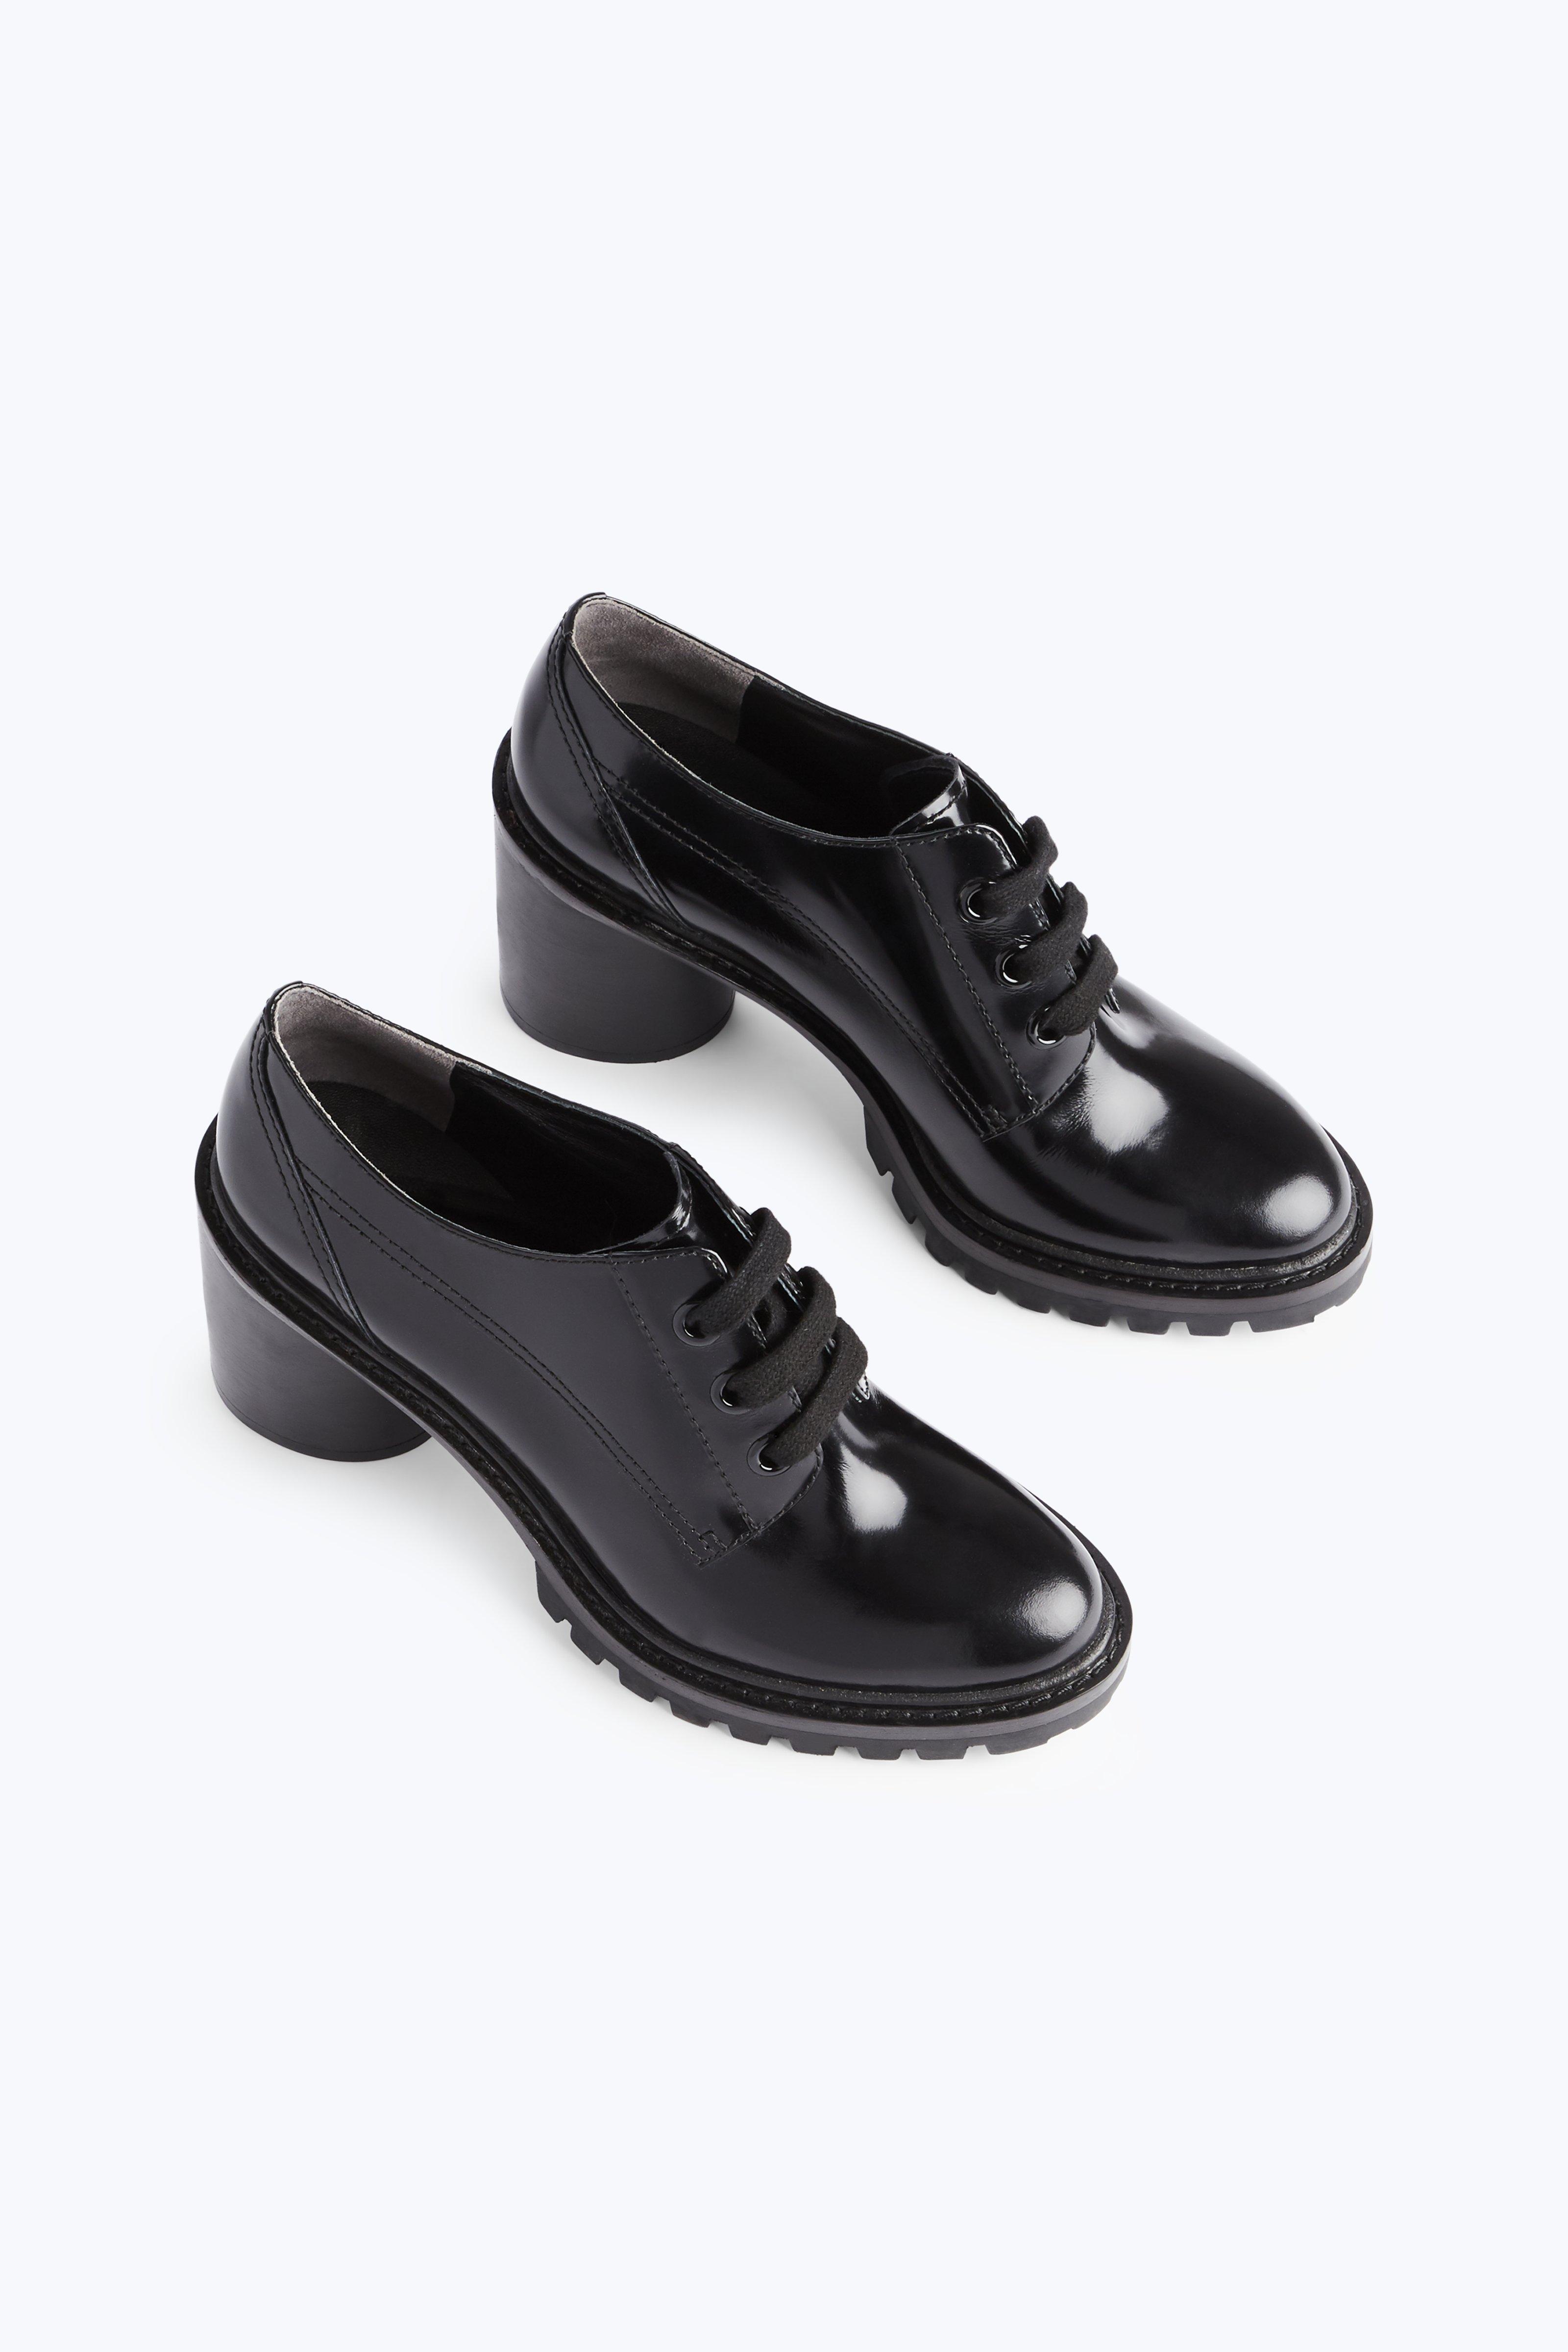 marc jacobs oxford shoes